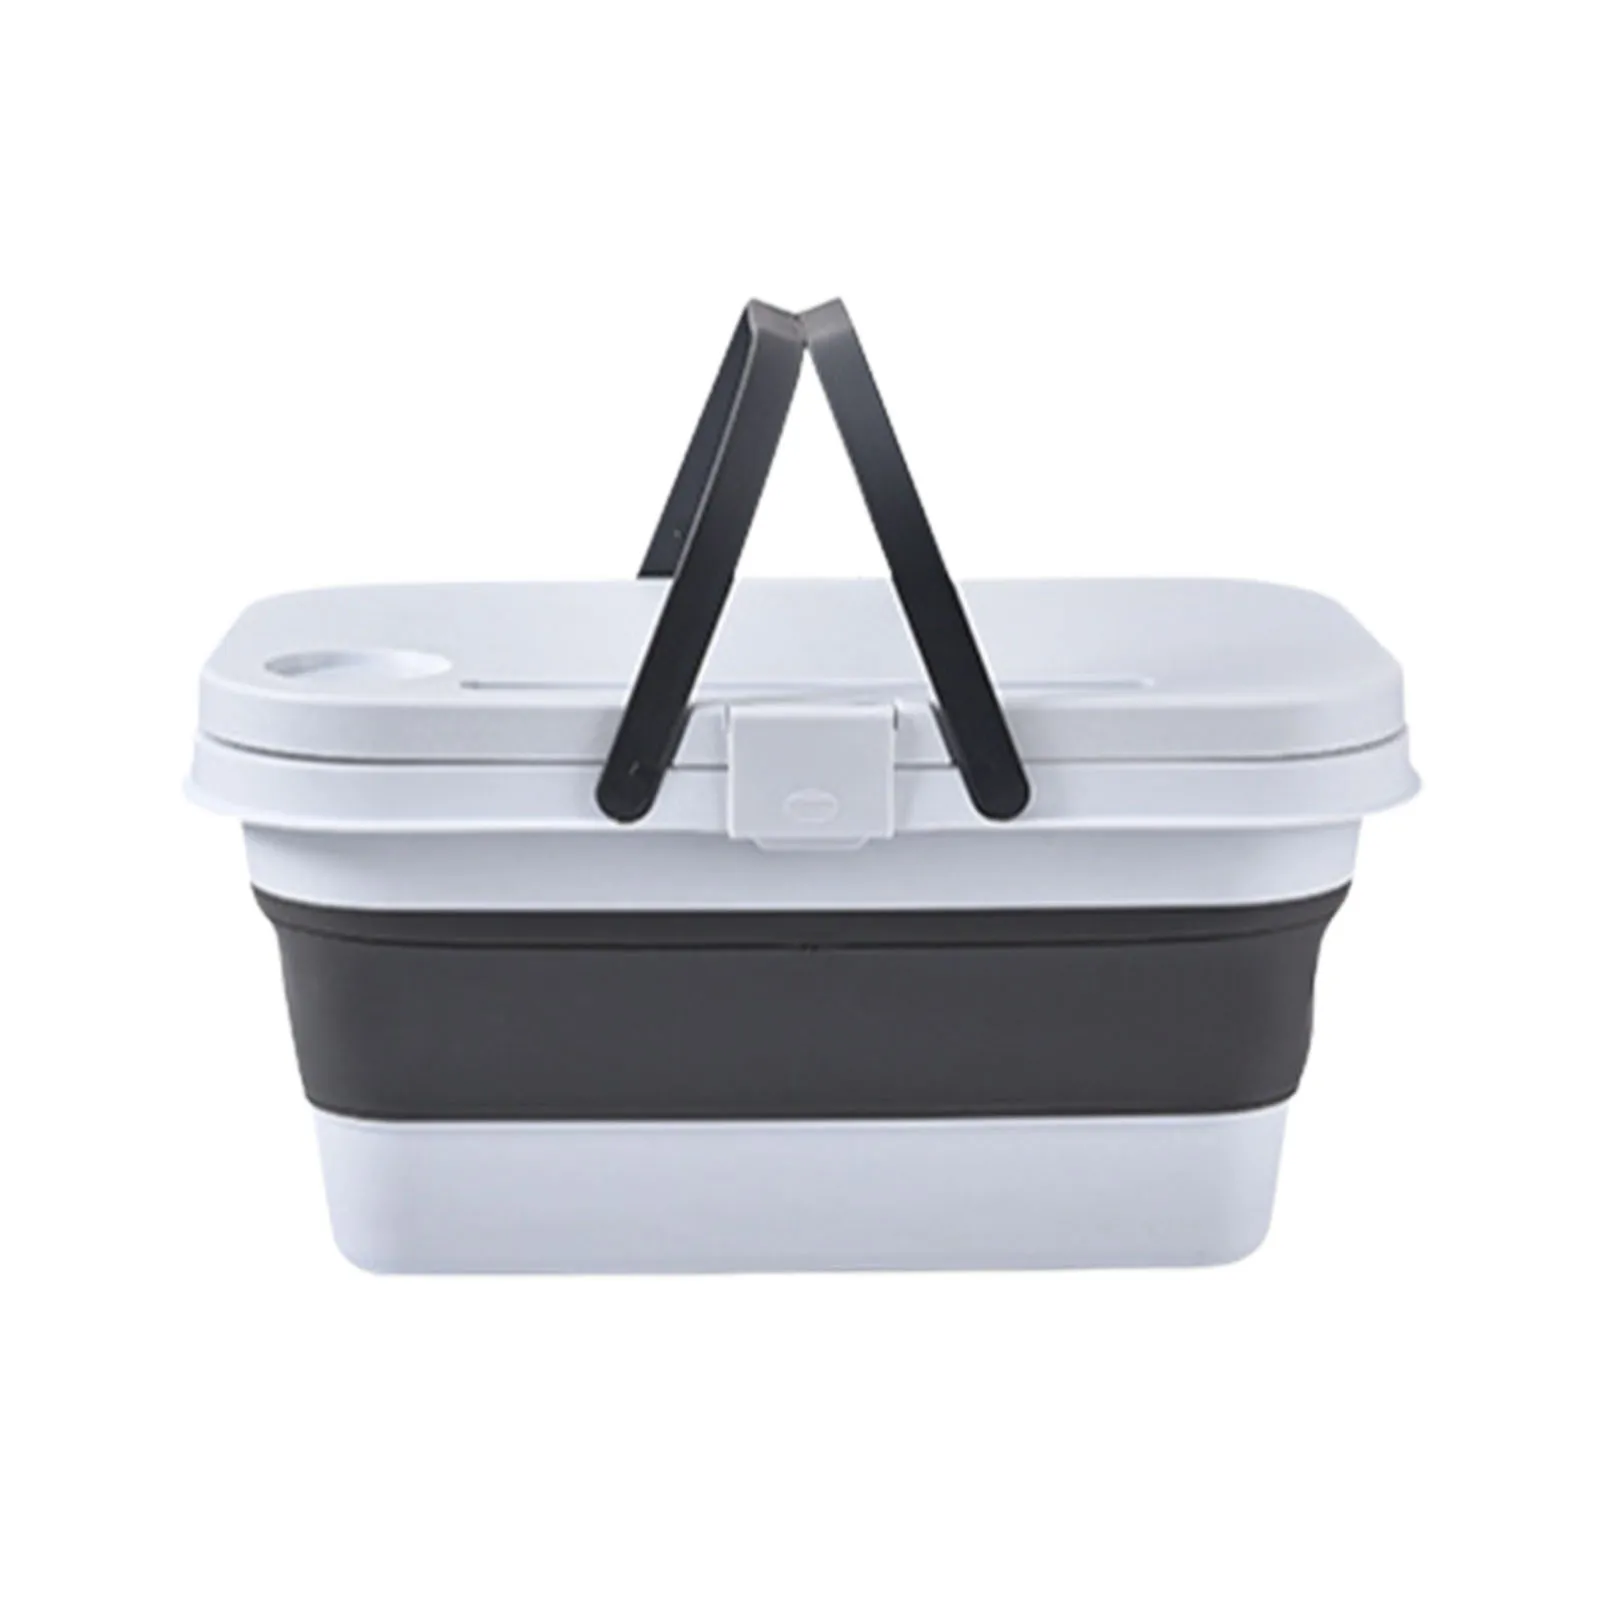 

Foldable Picnic Box With Small Table Portable Storage Container For Fruit Veggies Snacks Drinks Picnic Organizing Tool For